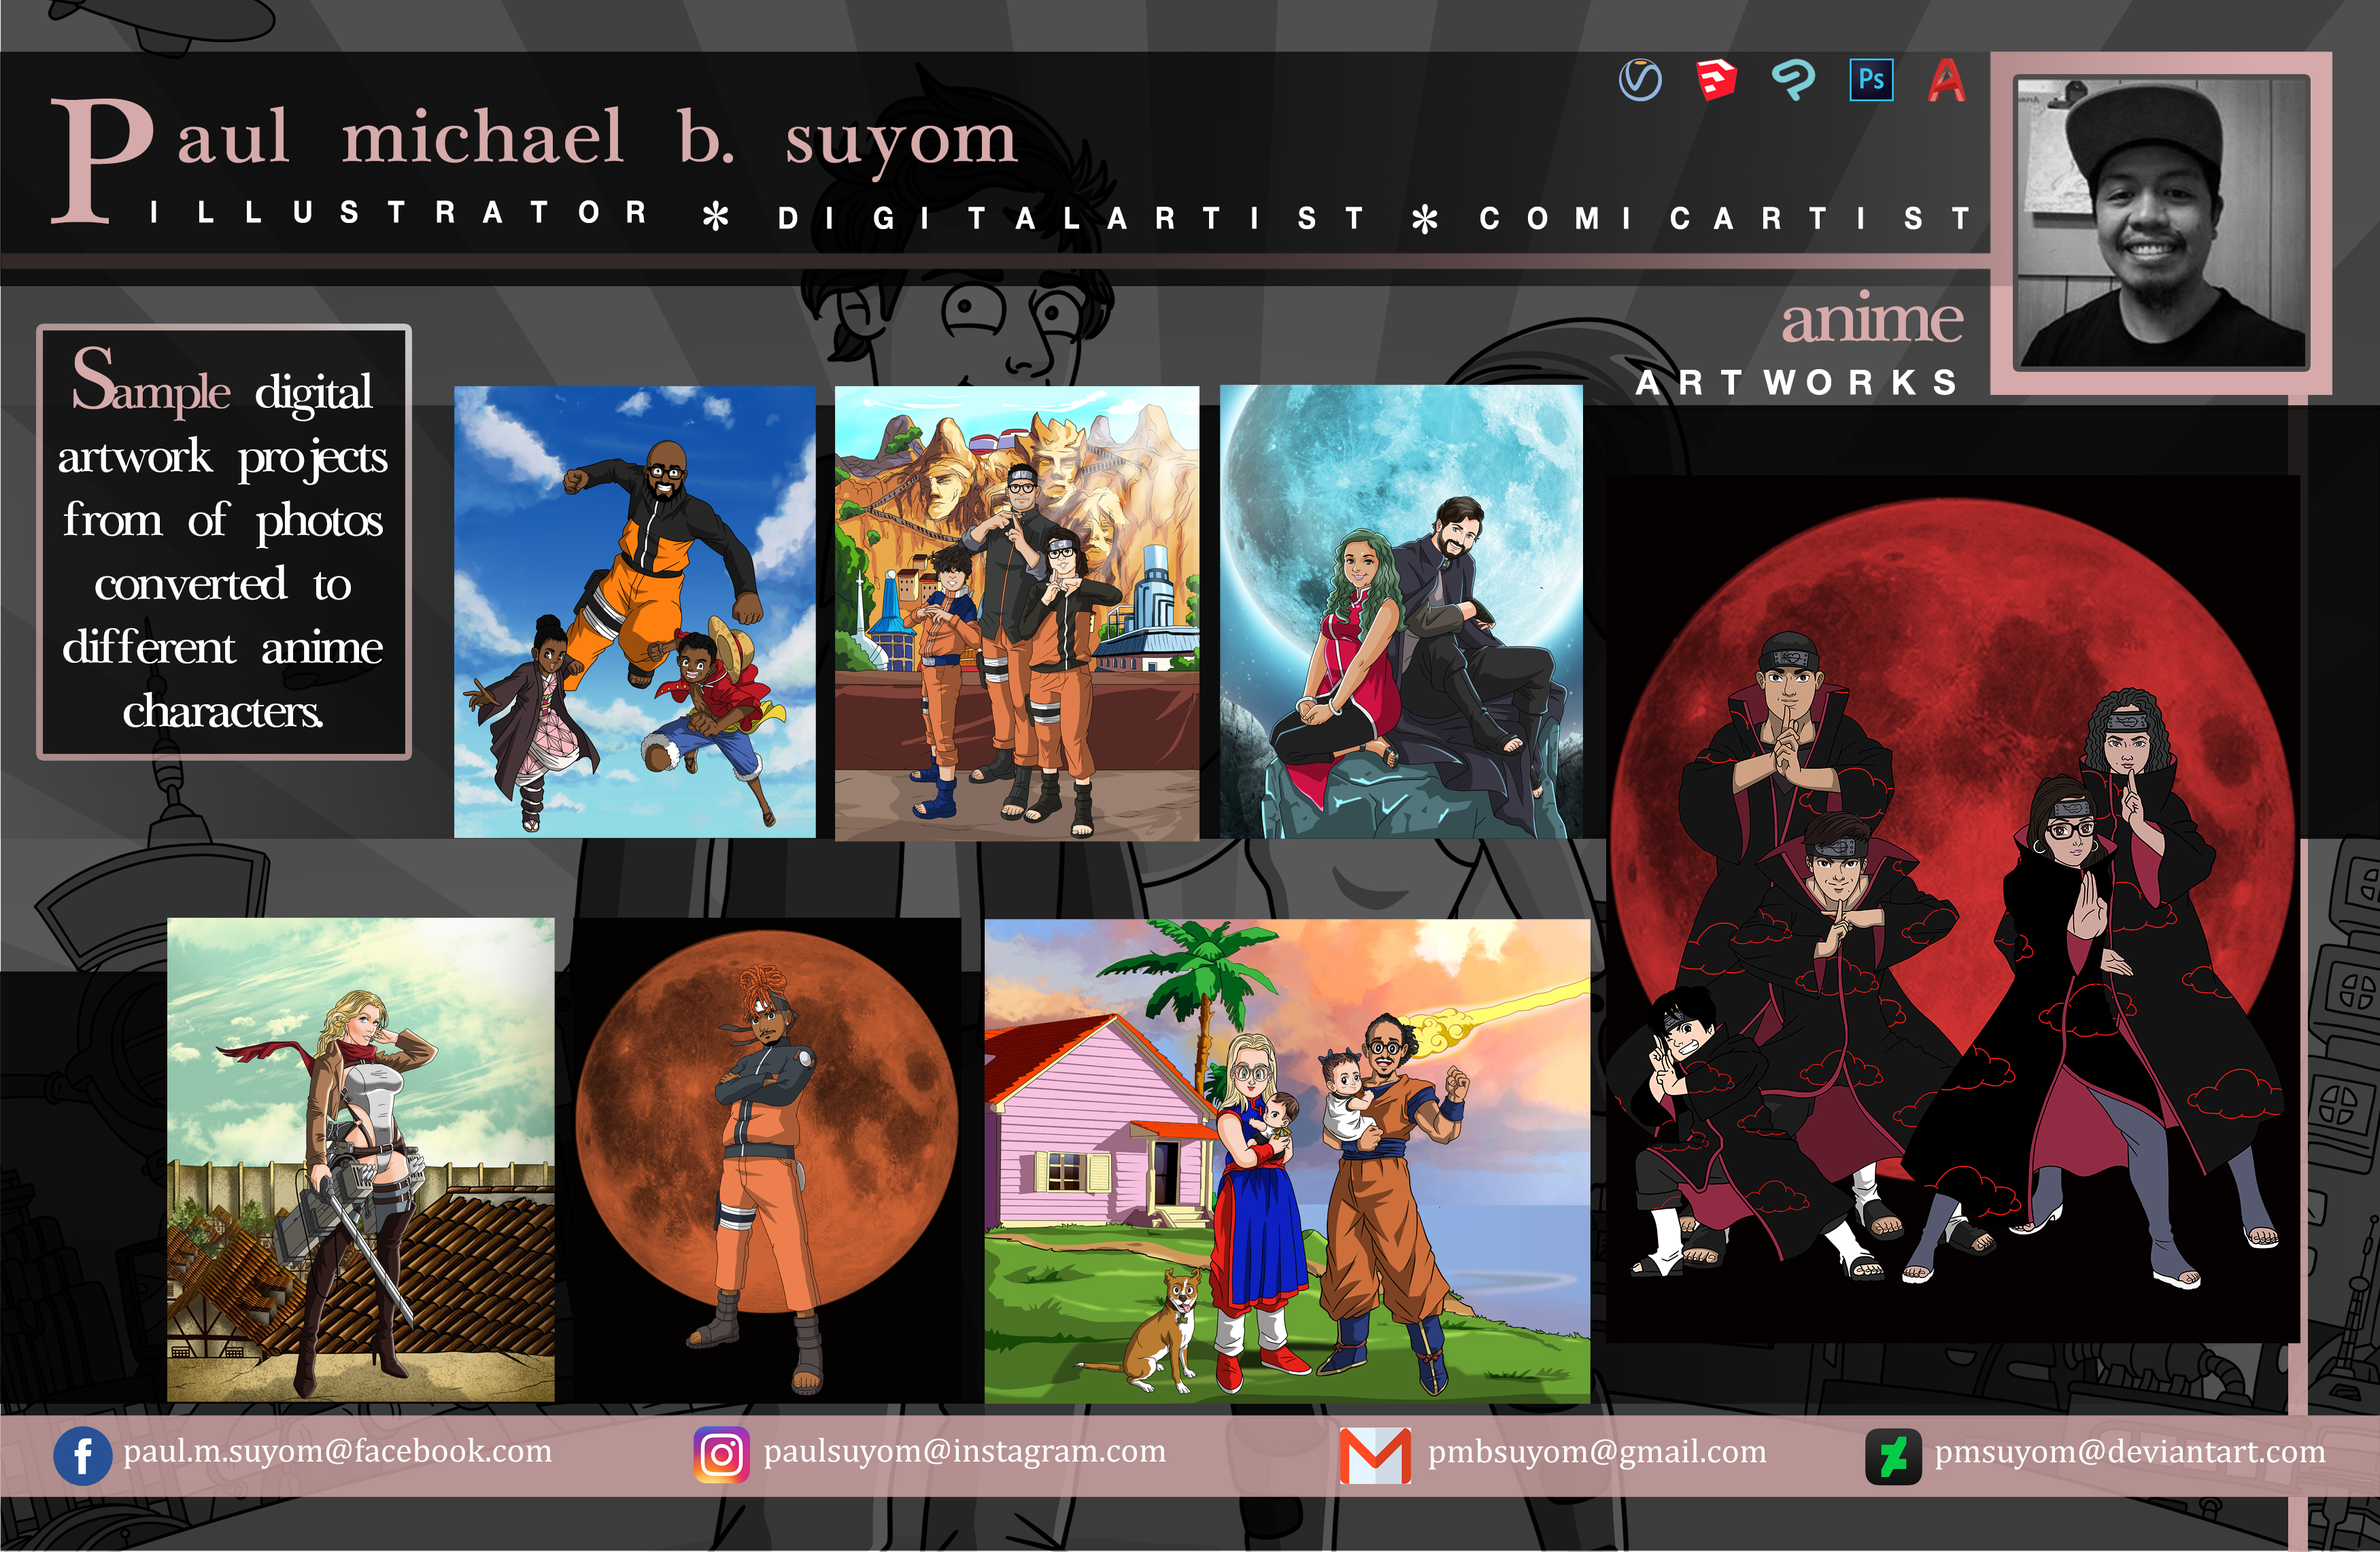 | CREAN
Pau michael b. suyom
|

LLUSTRATOR 3% DI

GI TALARTI ST % COMI CARTI ST

NT digital
artwork projects
from of photos
converted to
different anime
characters